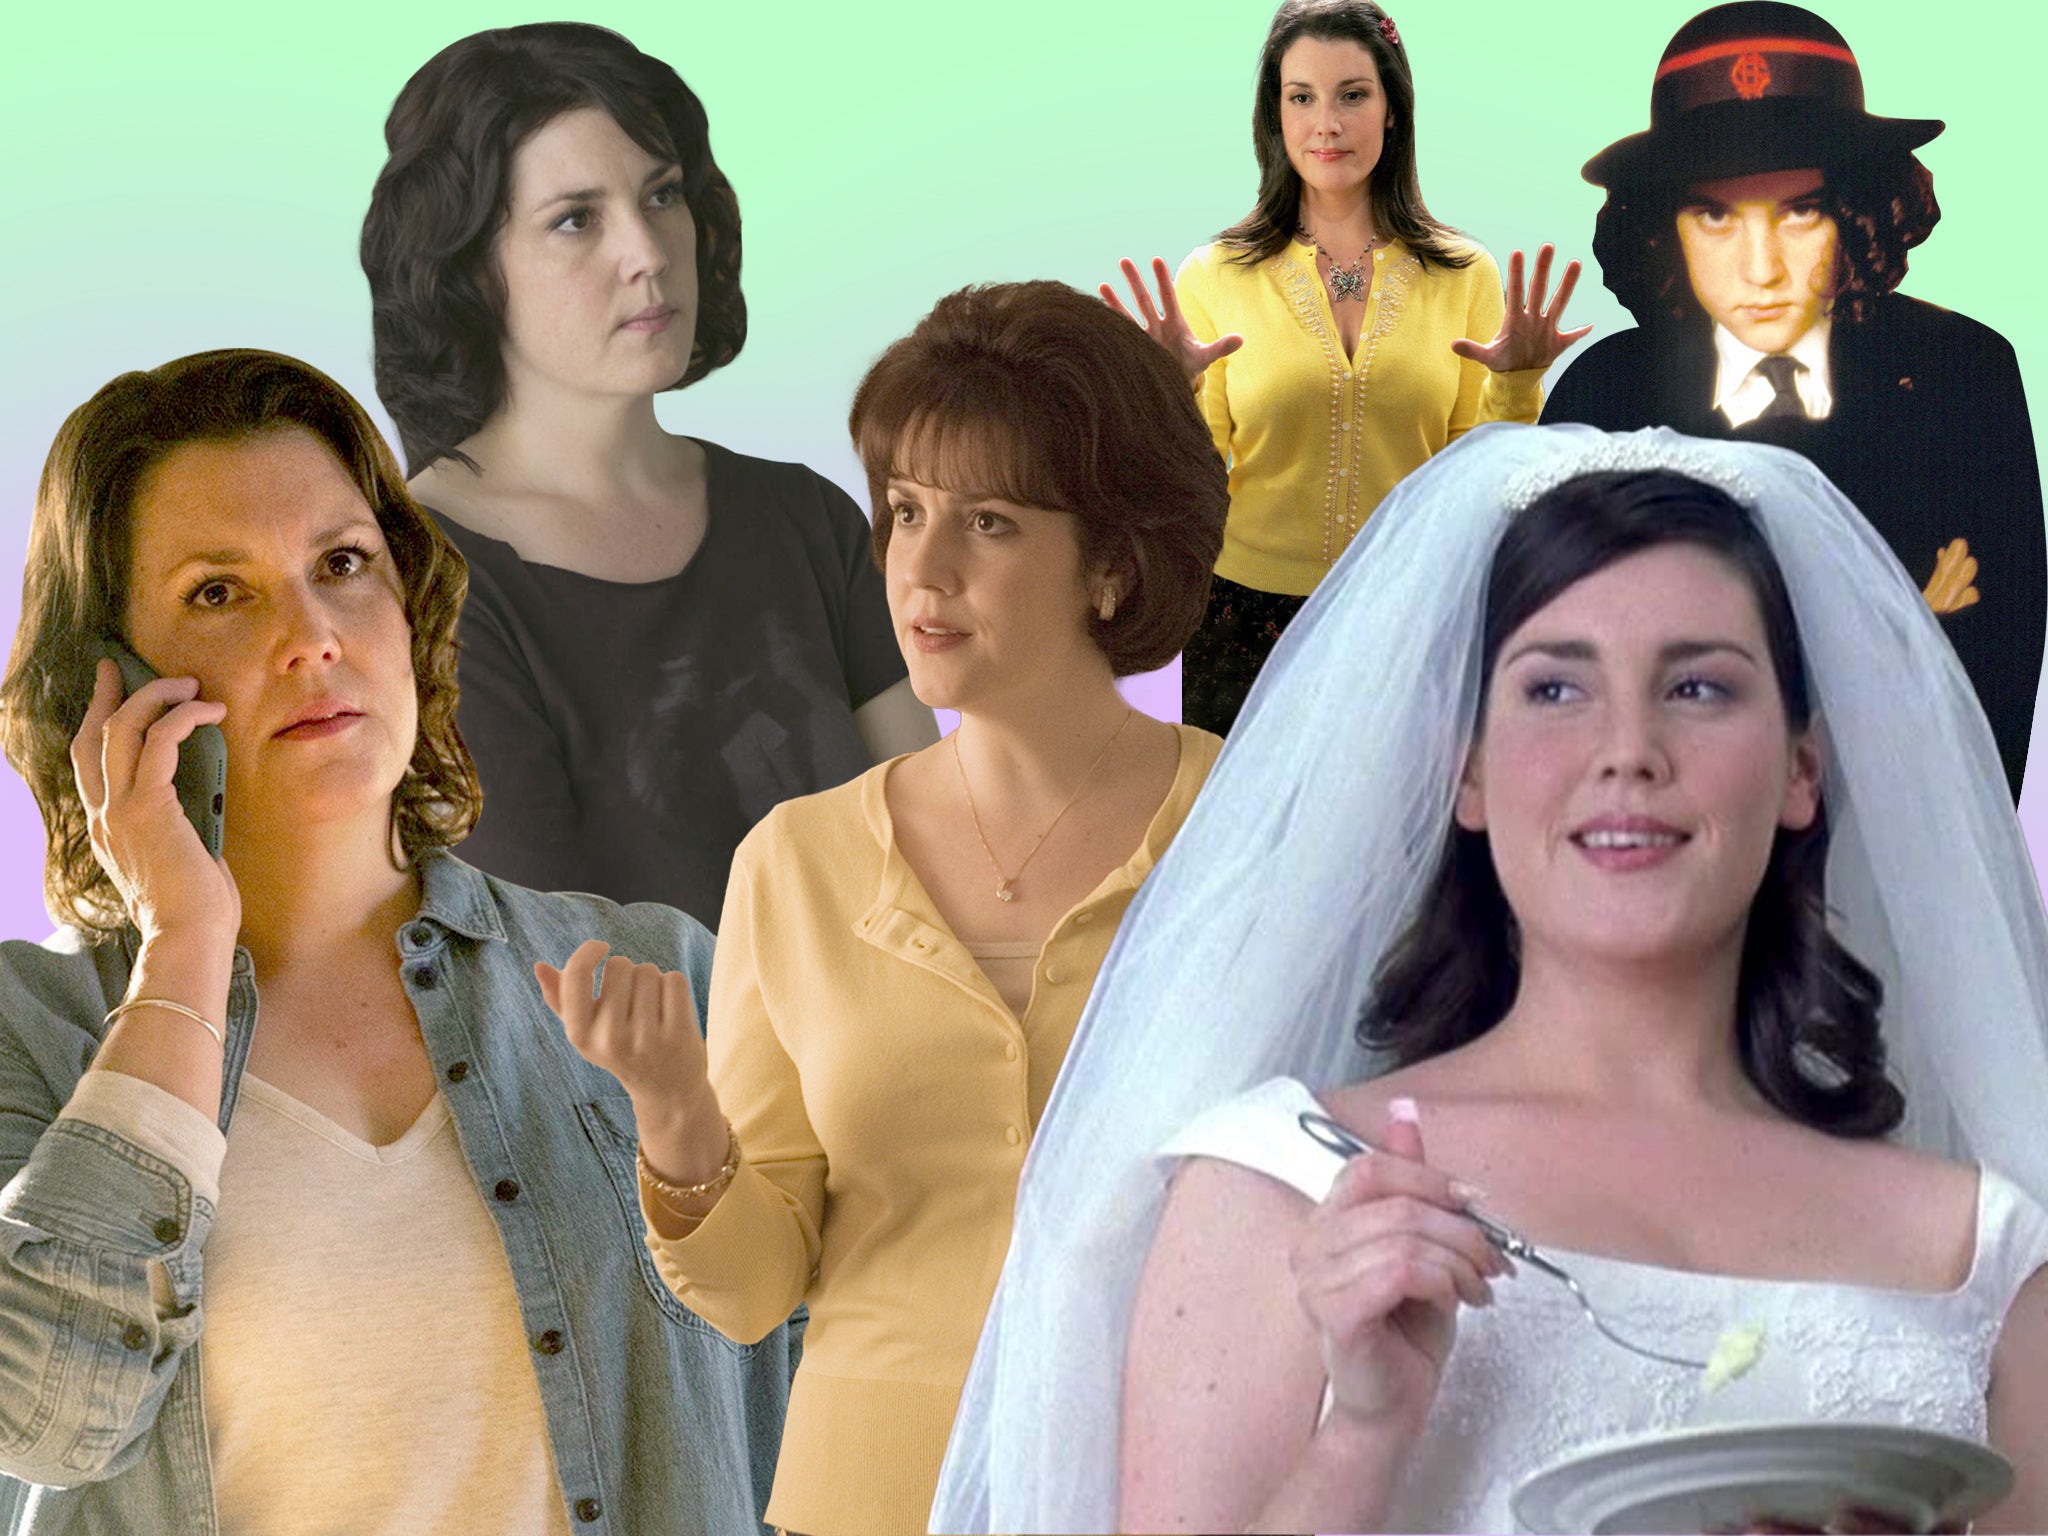 Since her 1994 debut aged 15 (top right), Melanie Lynskey has consistently turned in scene-stealing performances